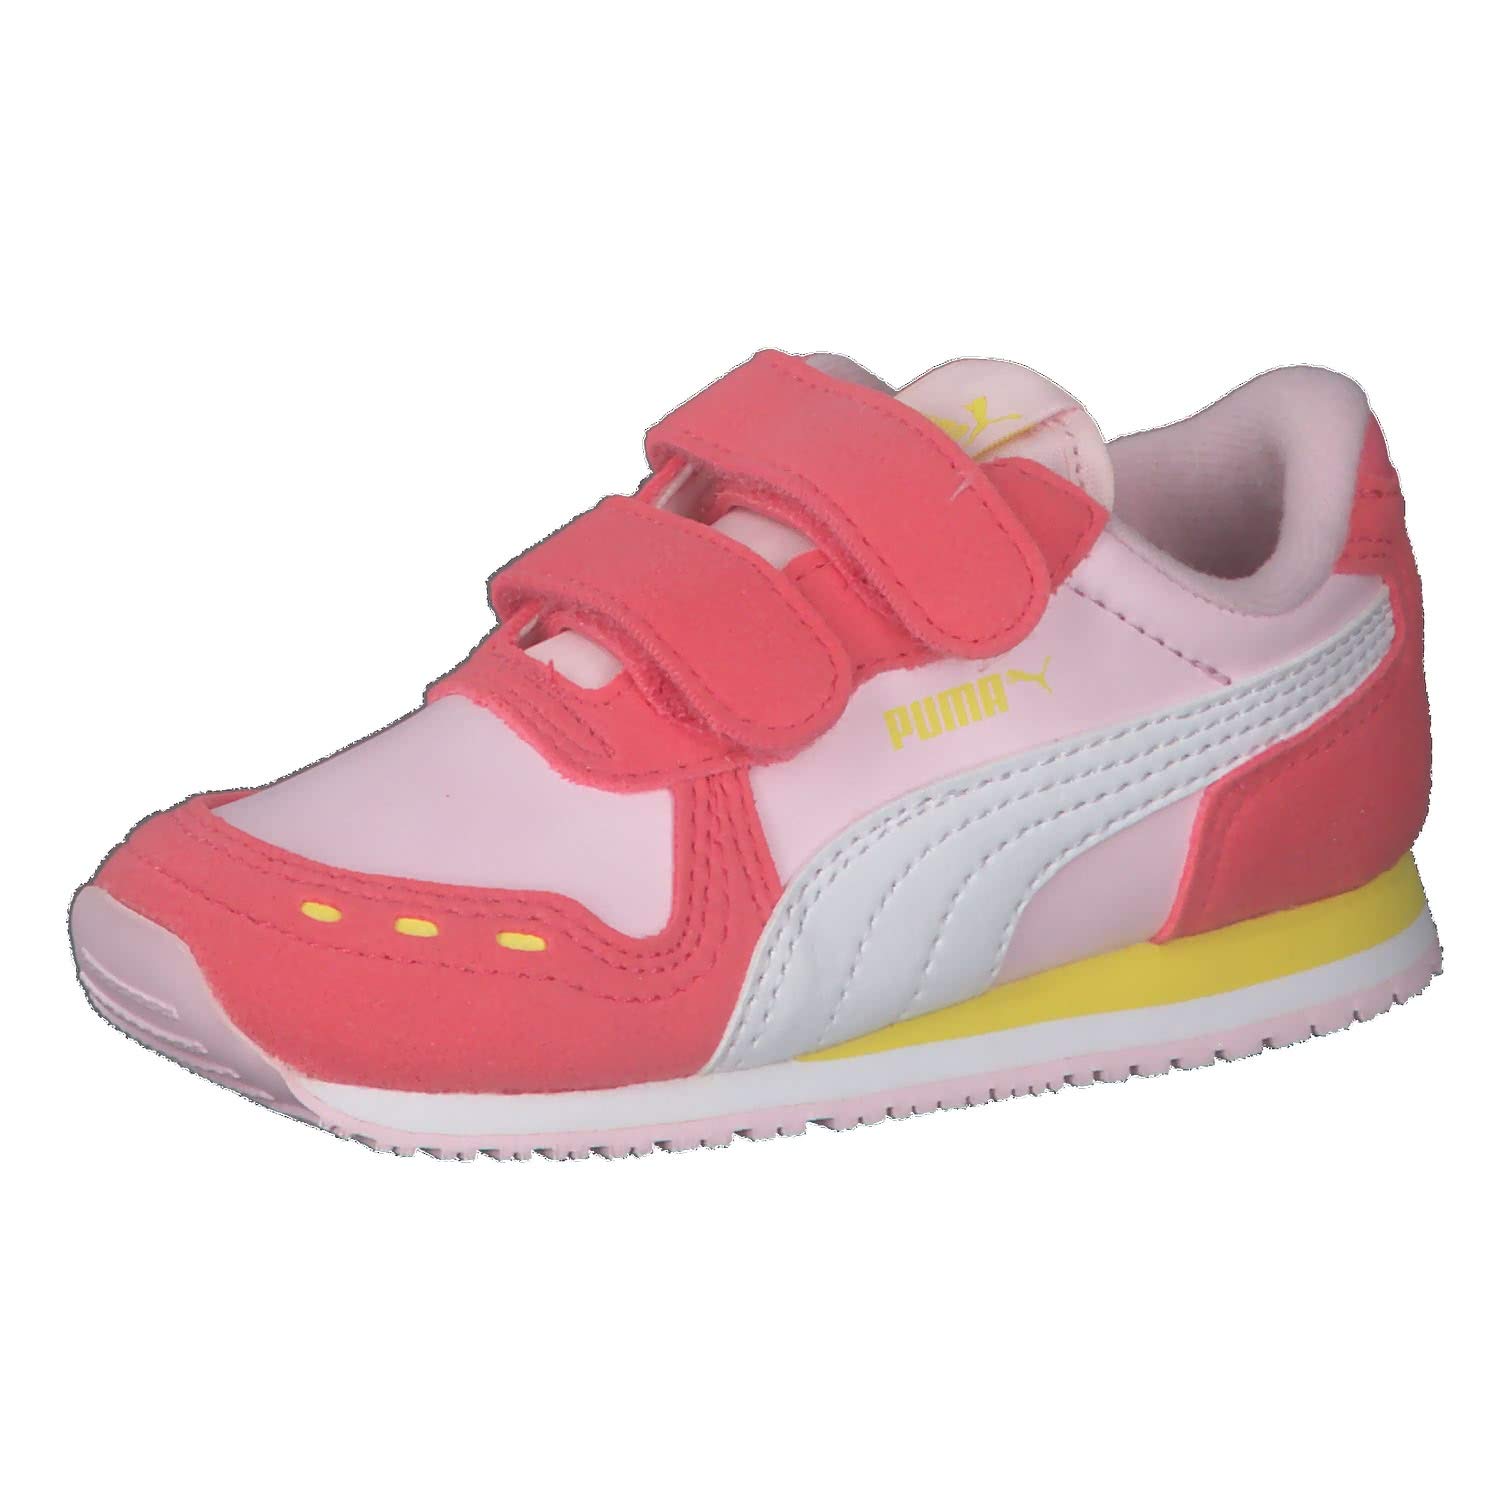 Puma Unisex Baby Cabana Racer SL V INF Sneaker, Pink Lady White-Sun Kissed Coral, 21 EU